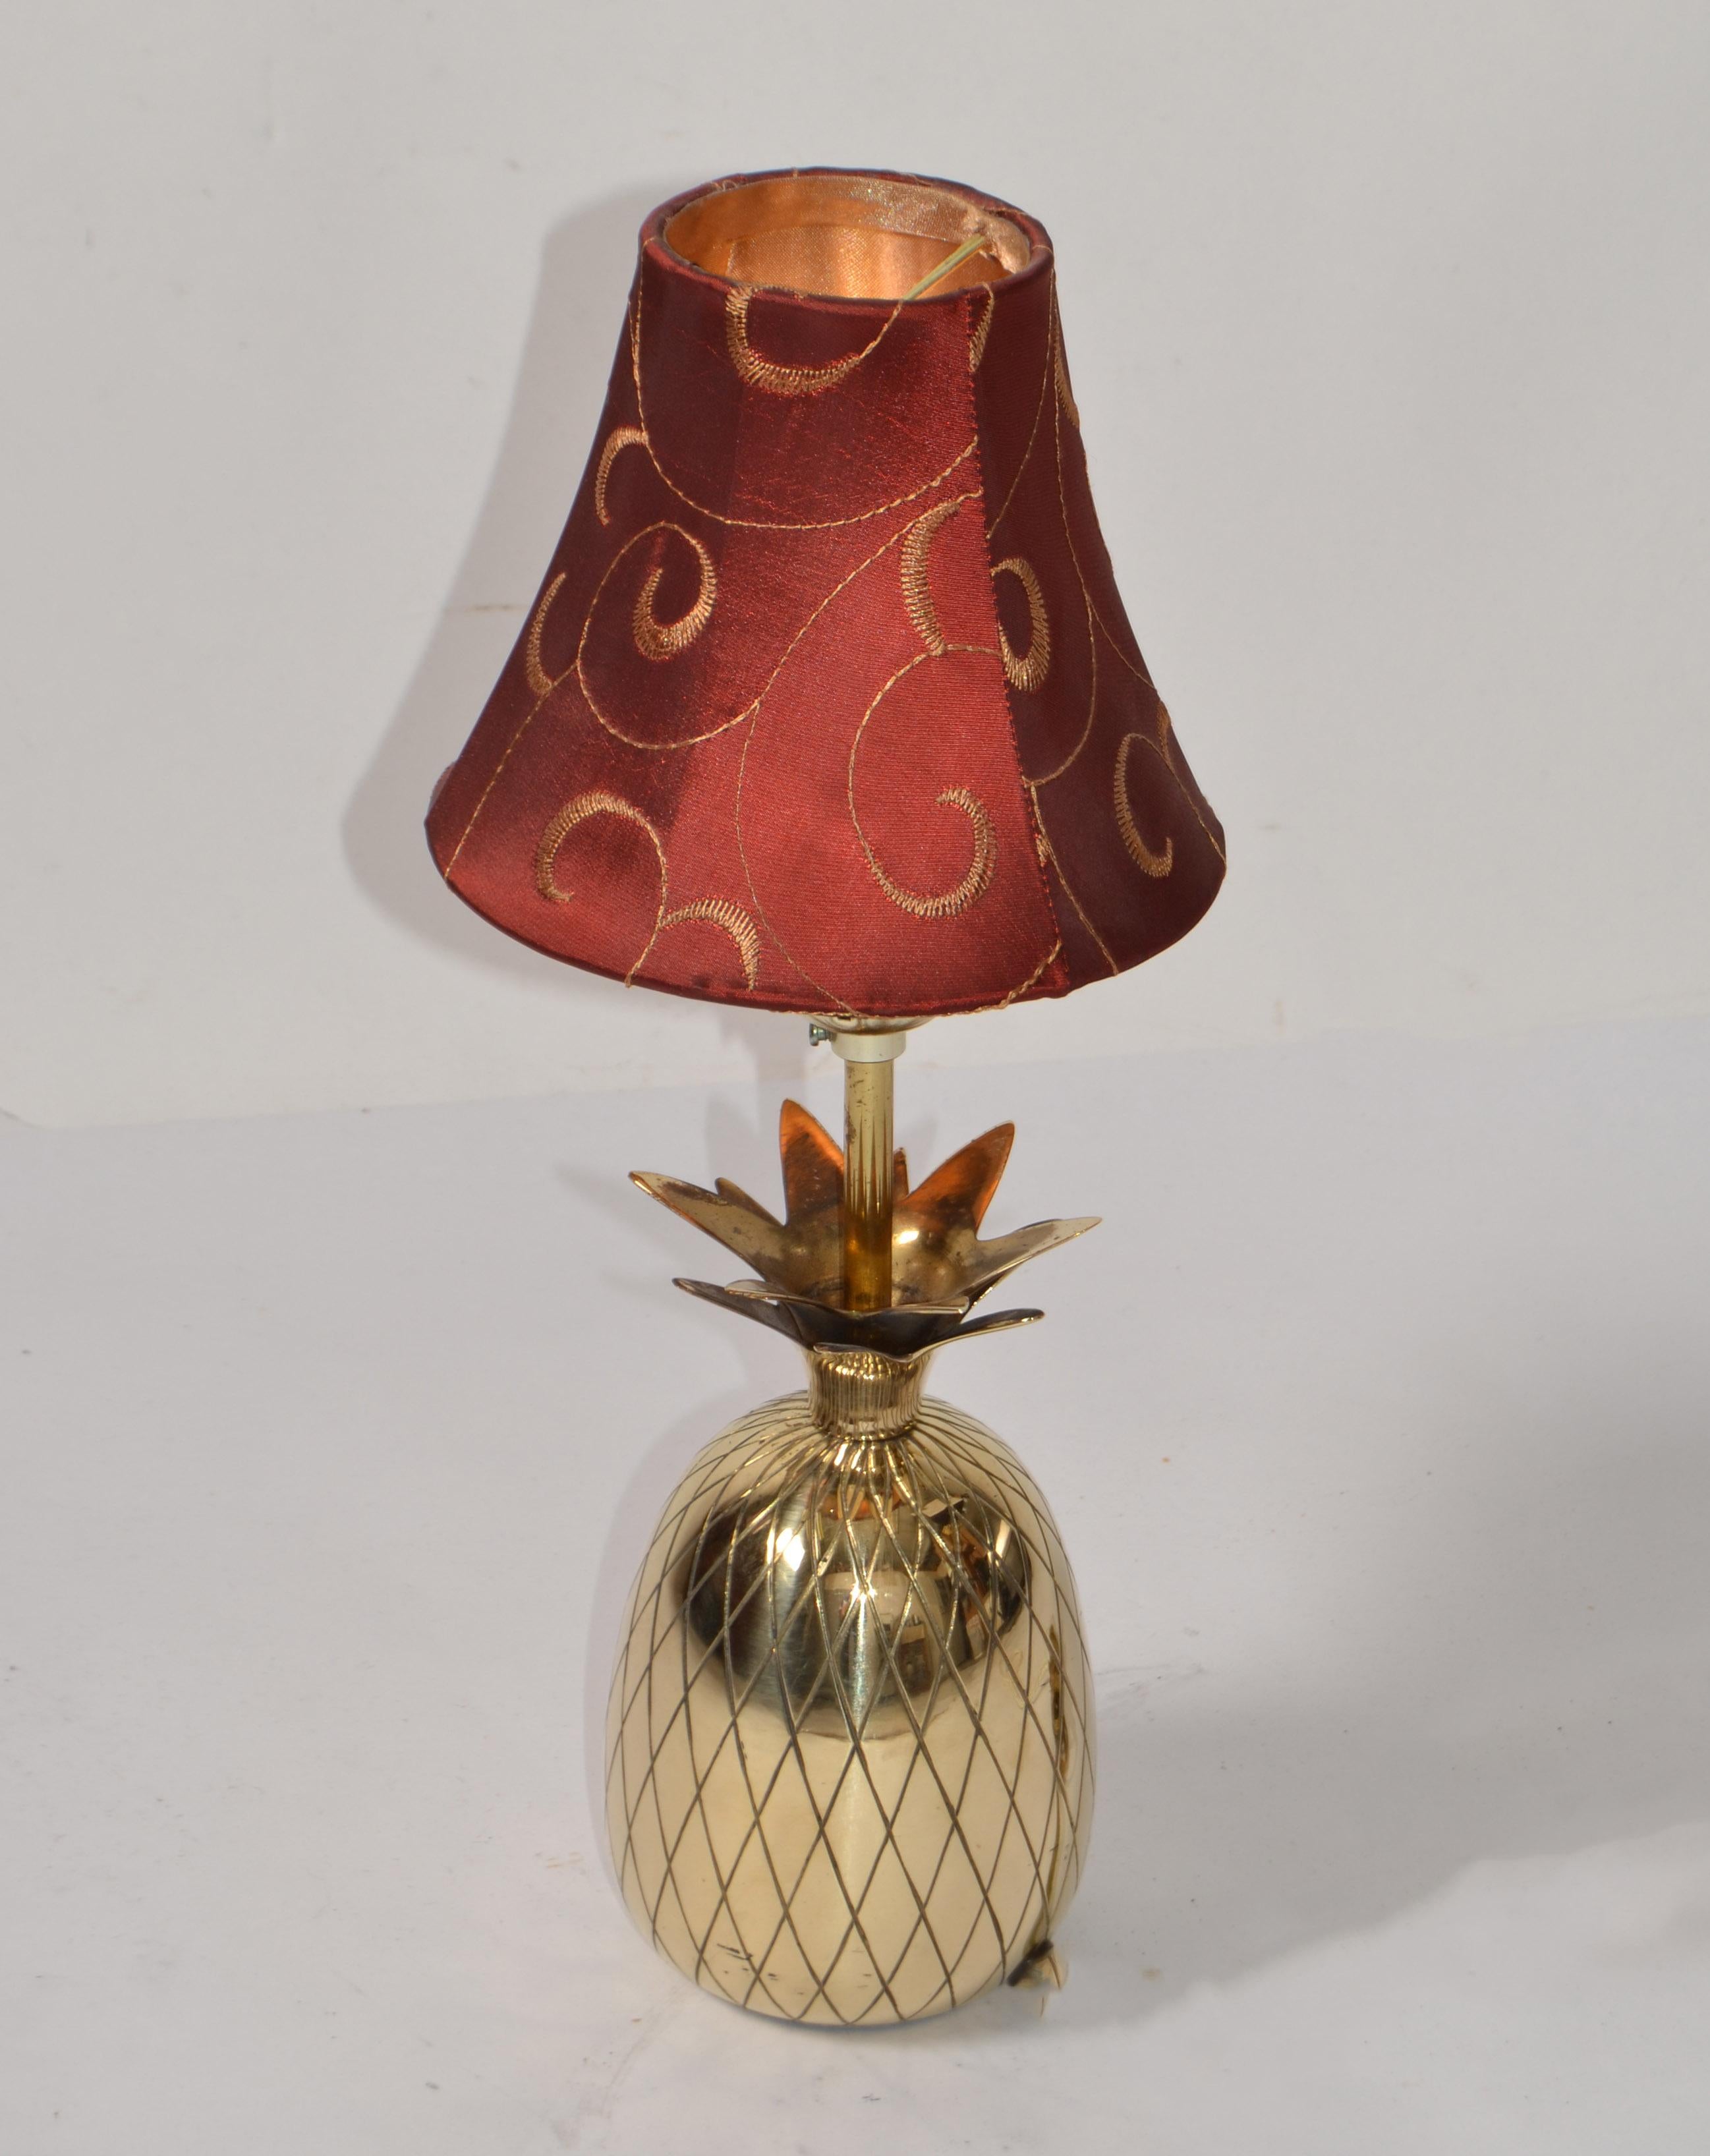 Small Hollywood Regency sculptural polished bronze pineapple table lamp or Bedside Table Light.
Has a felt cover to the base. Designed in the Style of the Frensh Artist Maison Charles and made to hold a clip-on shade.
Wired for the U.S. with